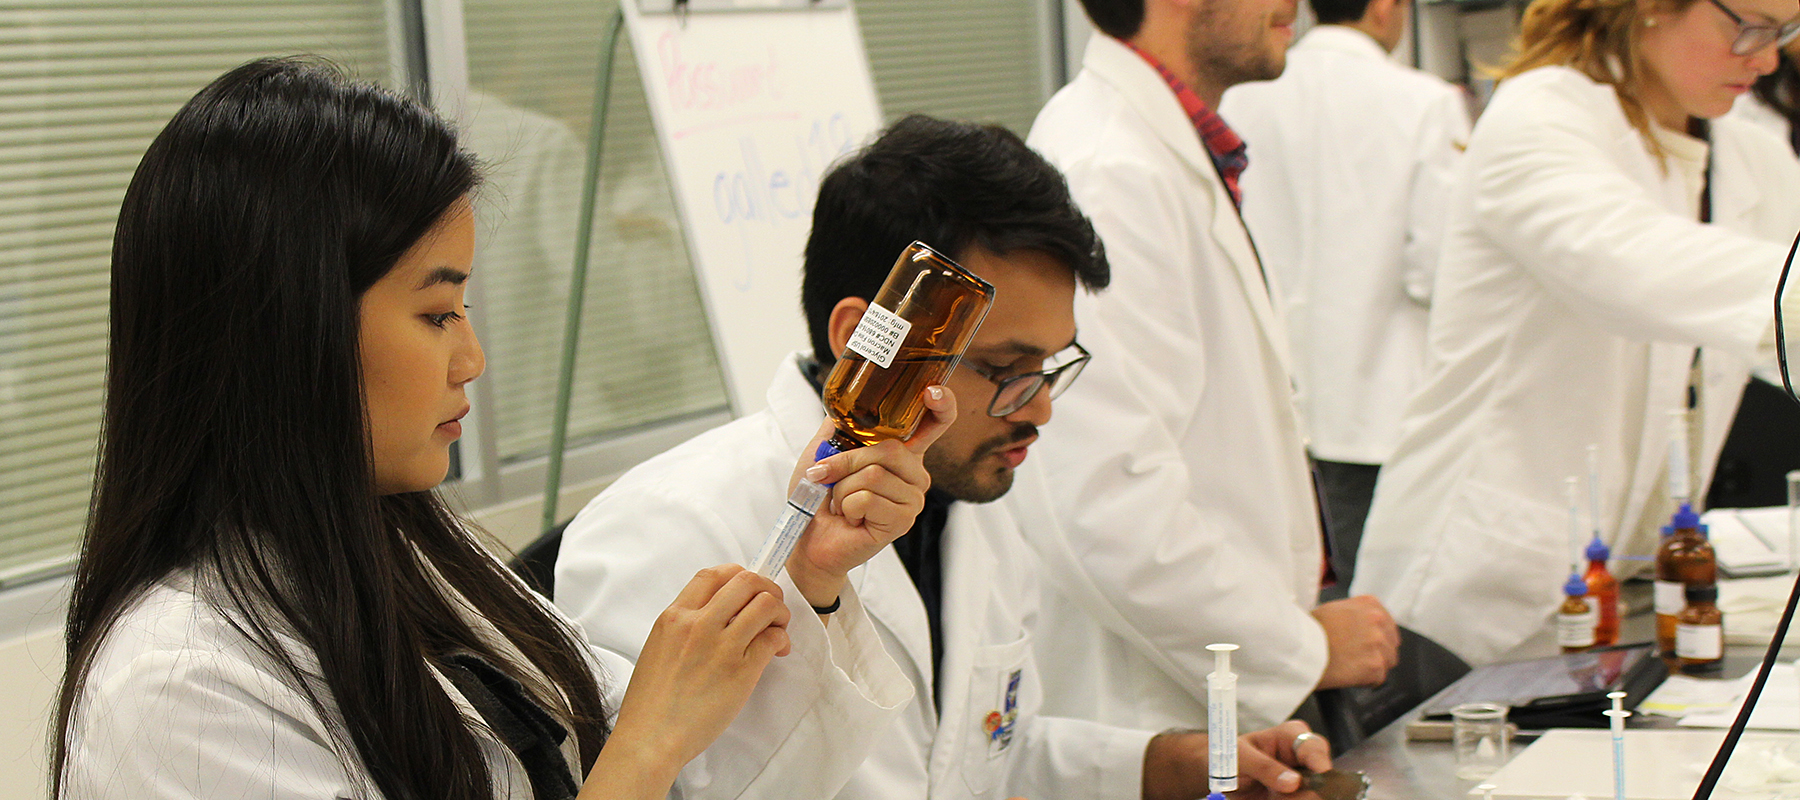 Students working with injections in a lab